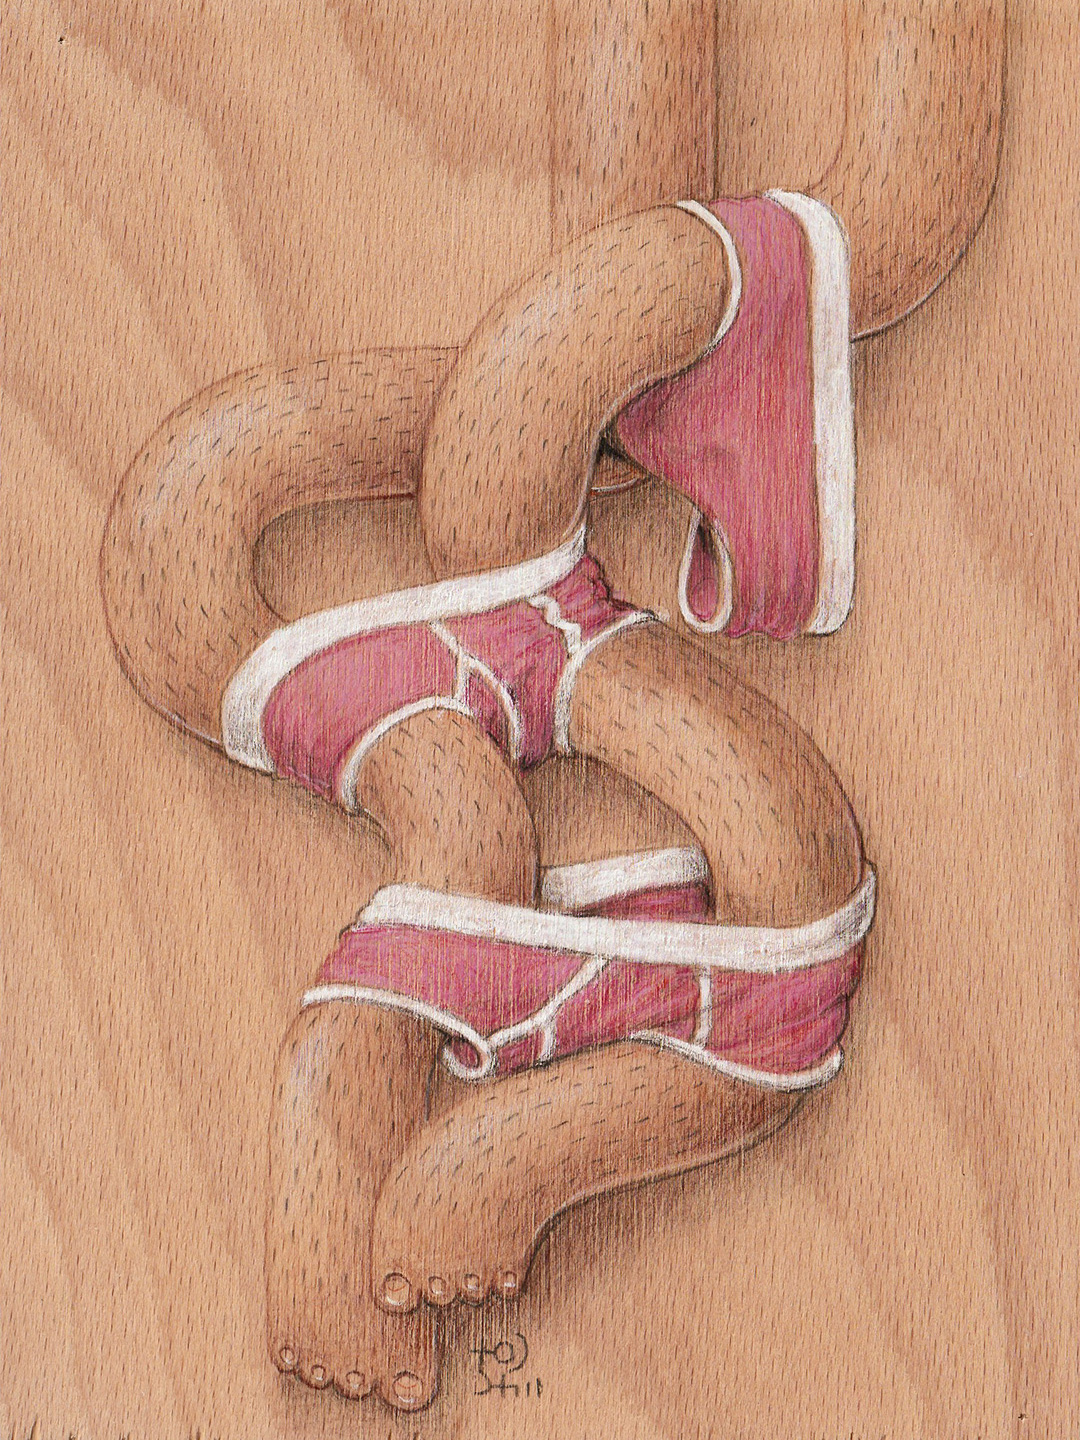 mixed_media_illustration_andre_levy_zhion_wood_colored_pencil_legs_masculine_underwear.jpg